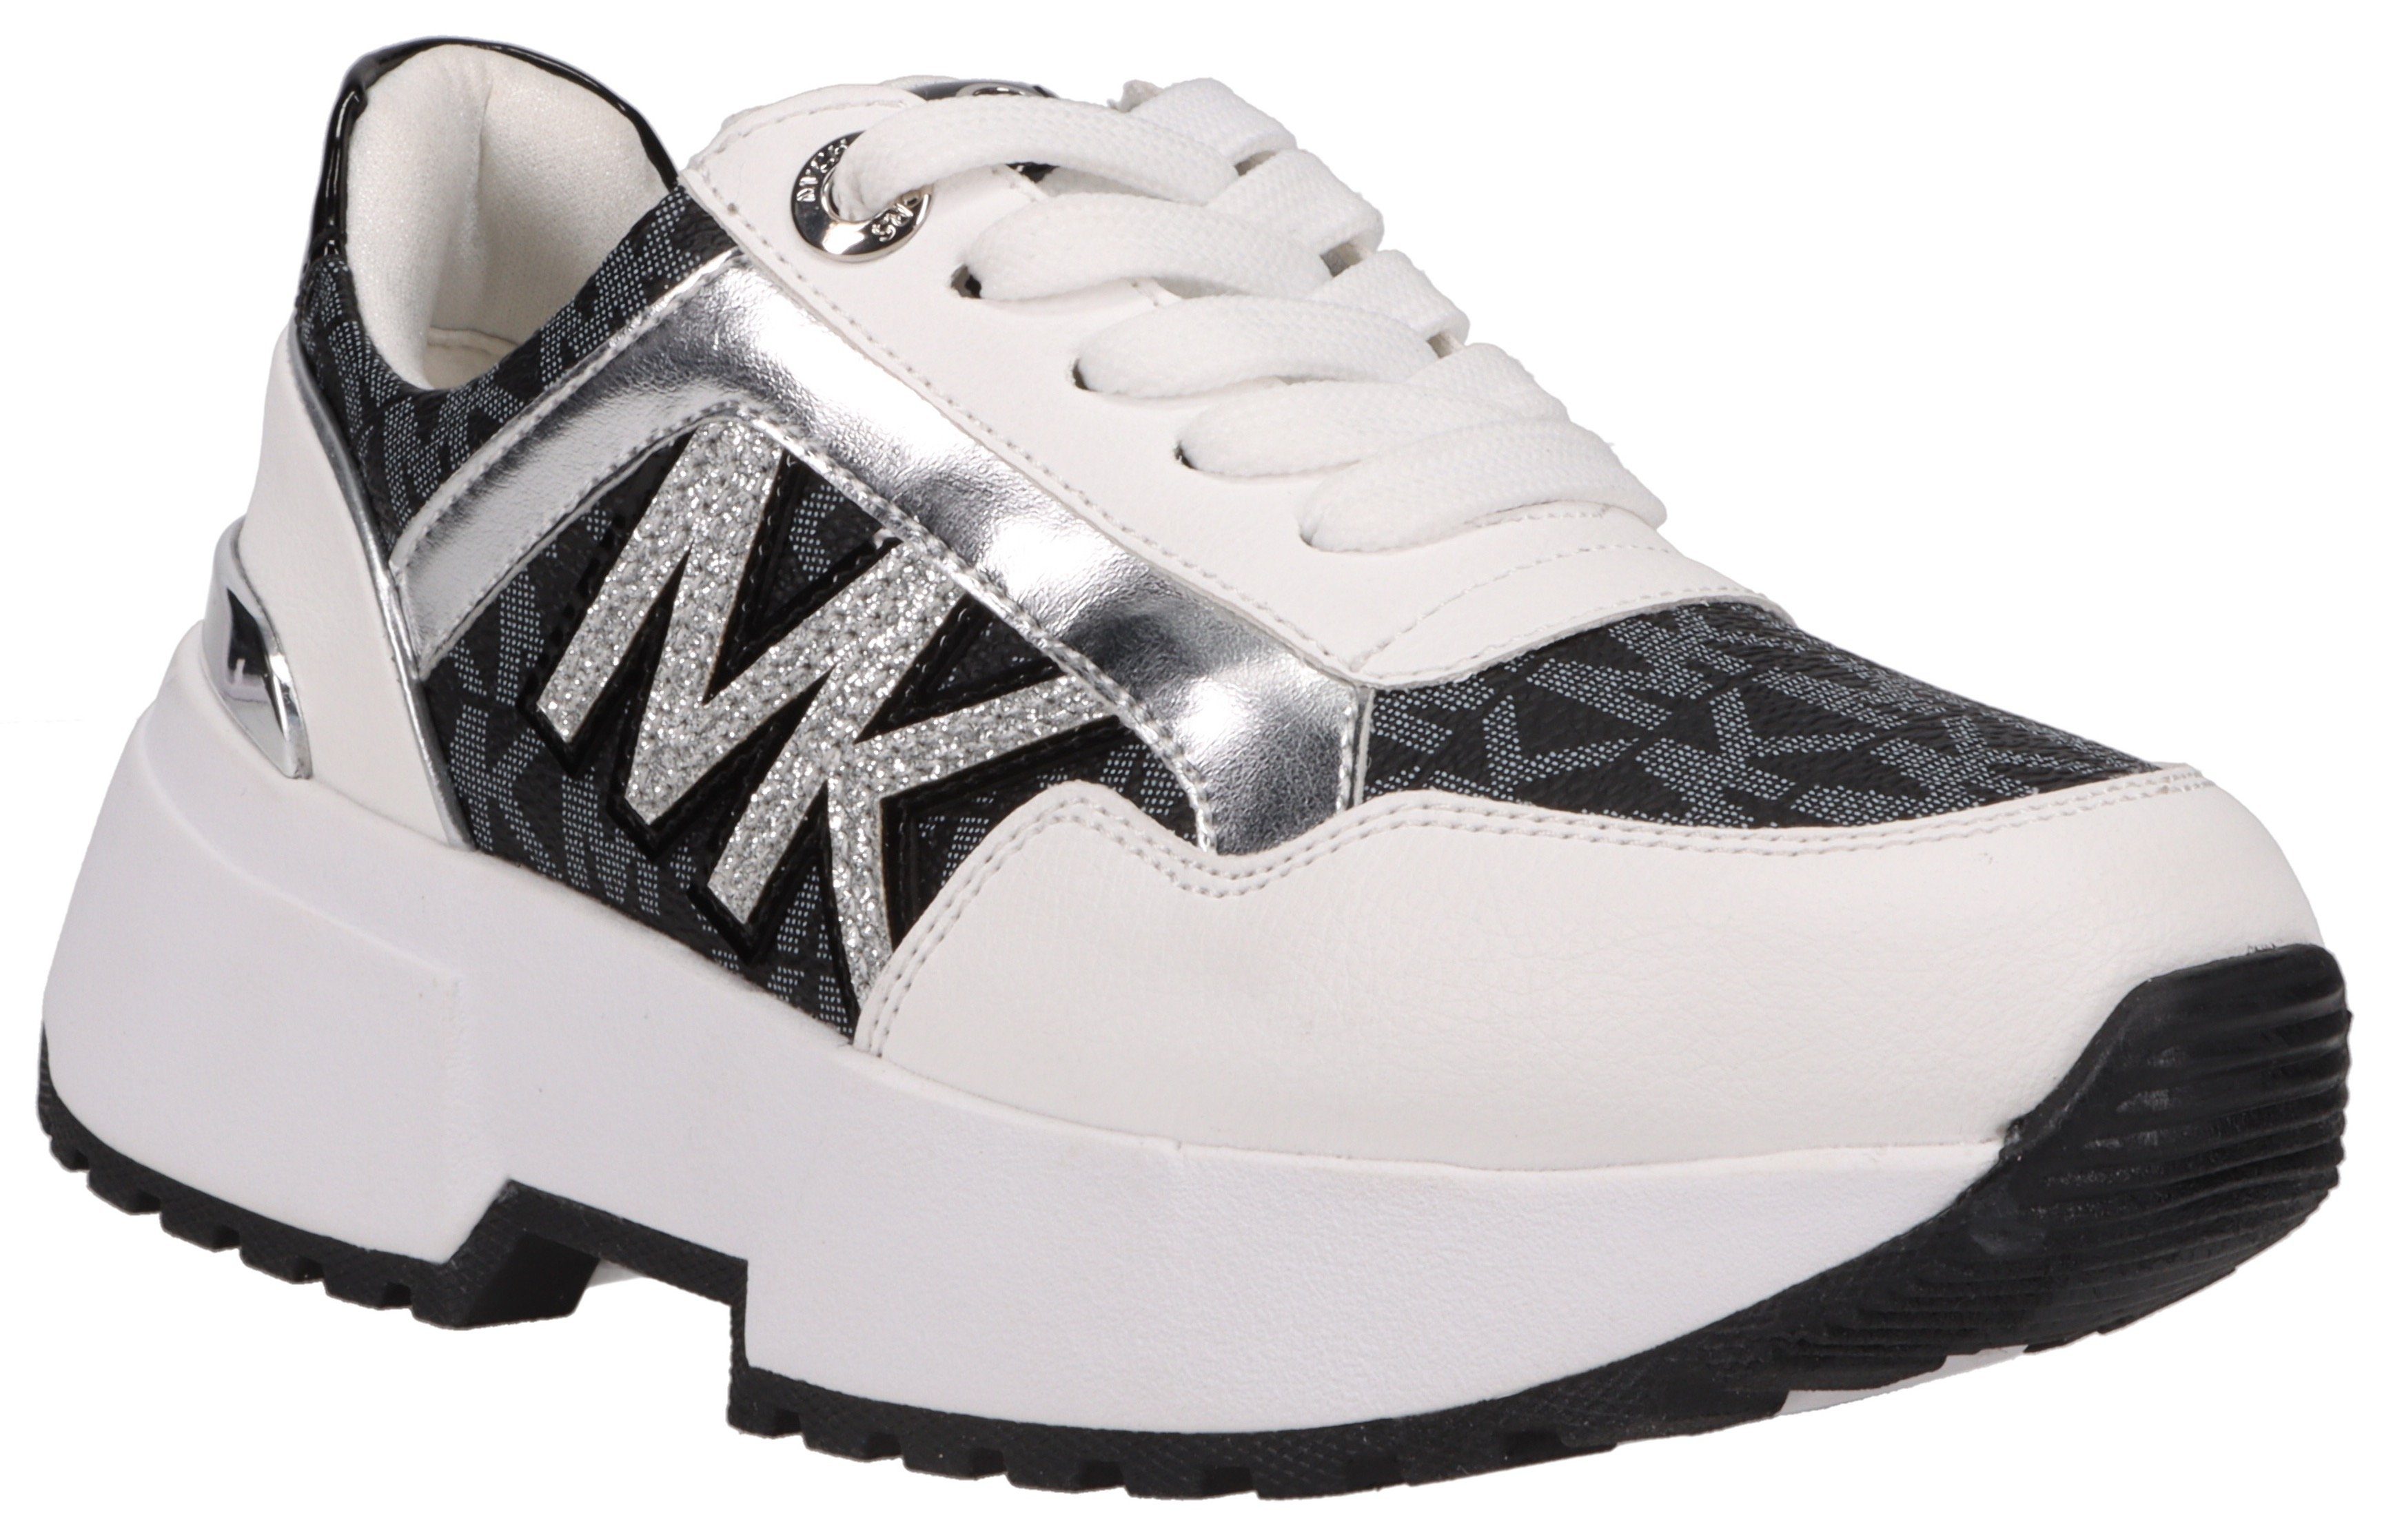 MICHAEL KORS Chunky-Laufsohle Sneaker Maddy Cosmo Plateausneaker mit KIDS